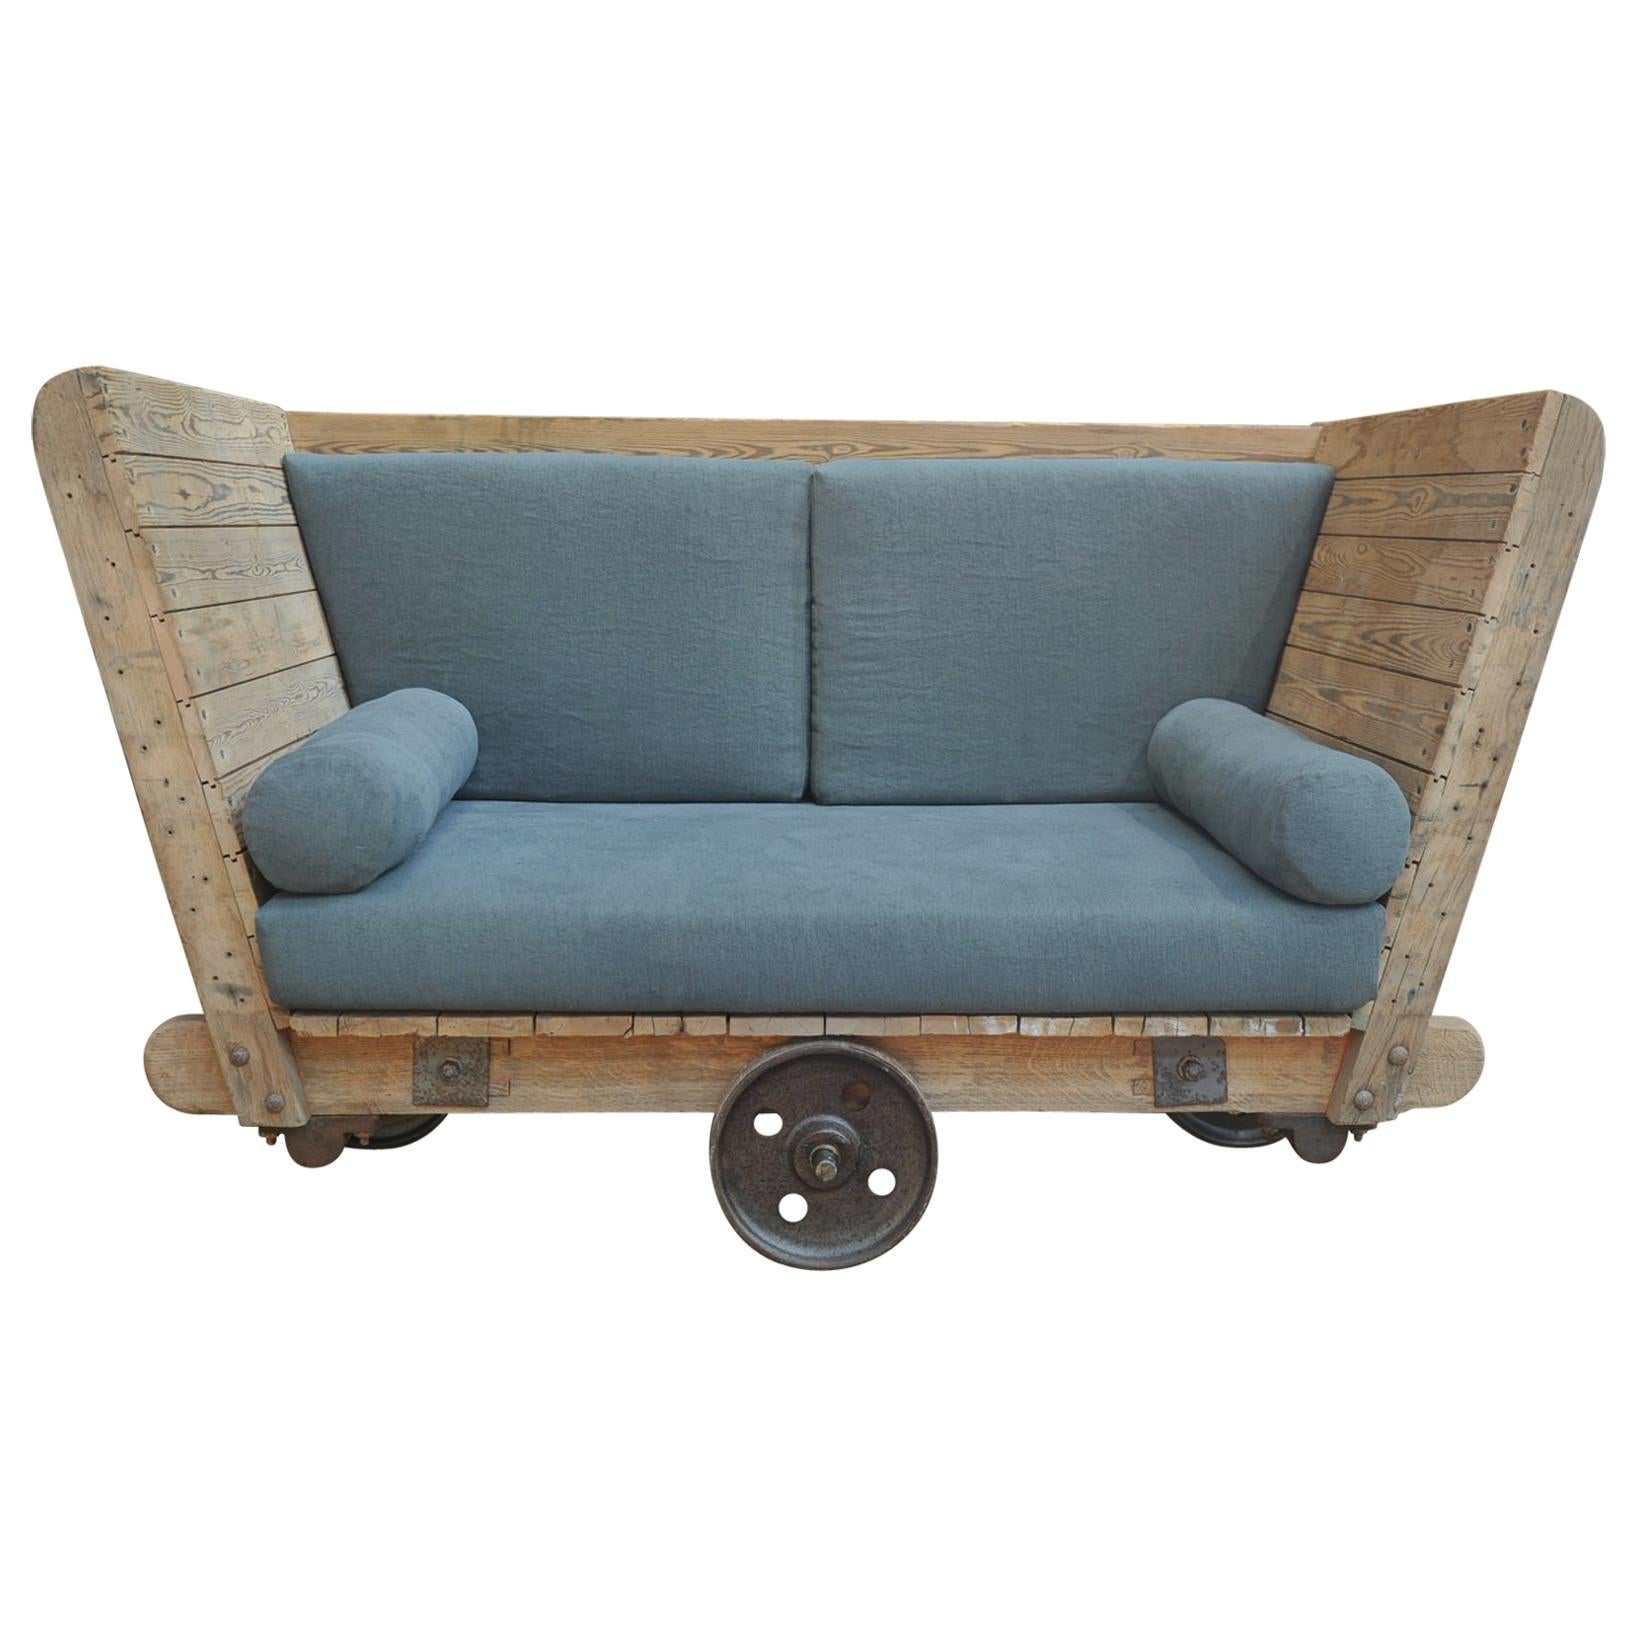 1920s Pine and Metal Wheels Trolley in Reupholstered in Sofa